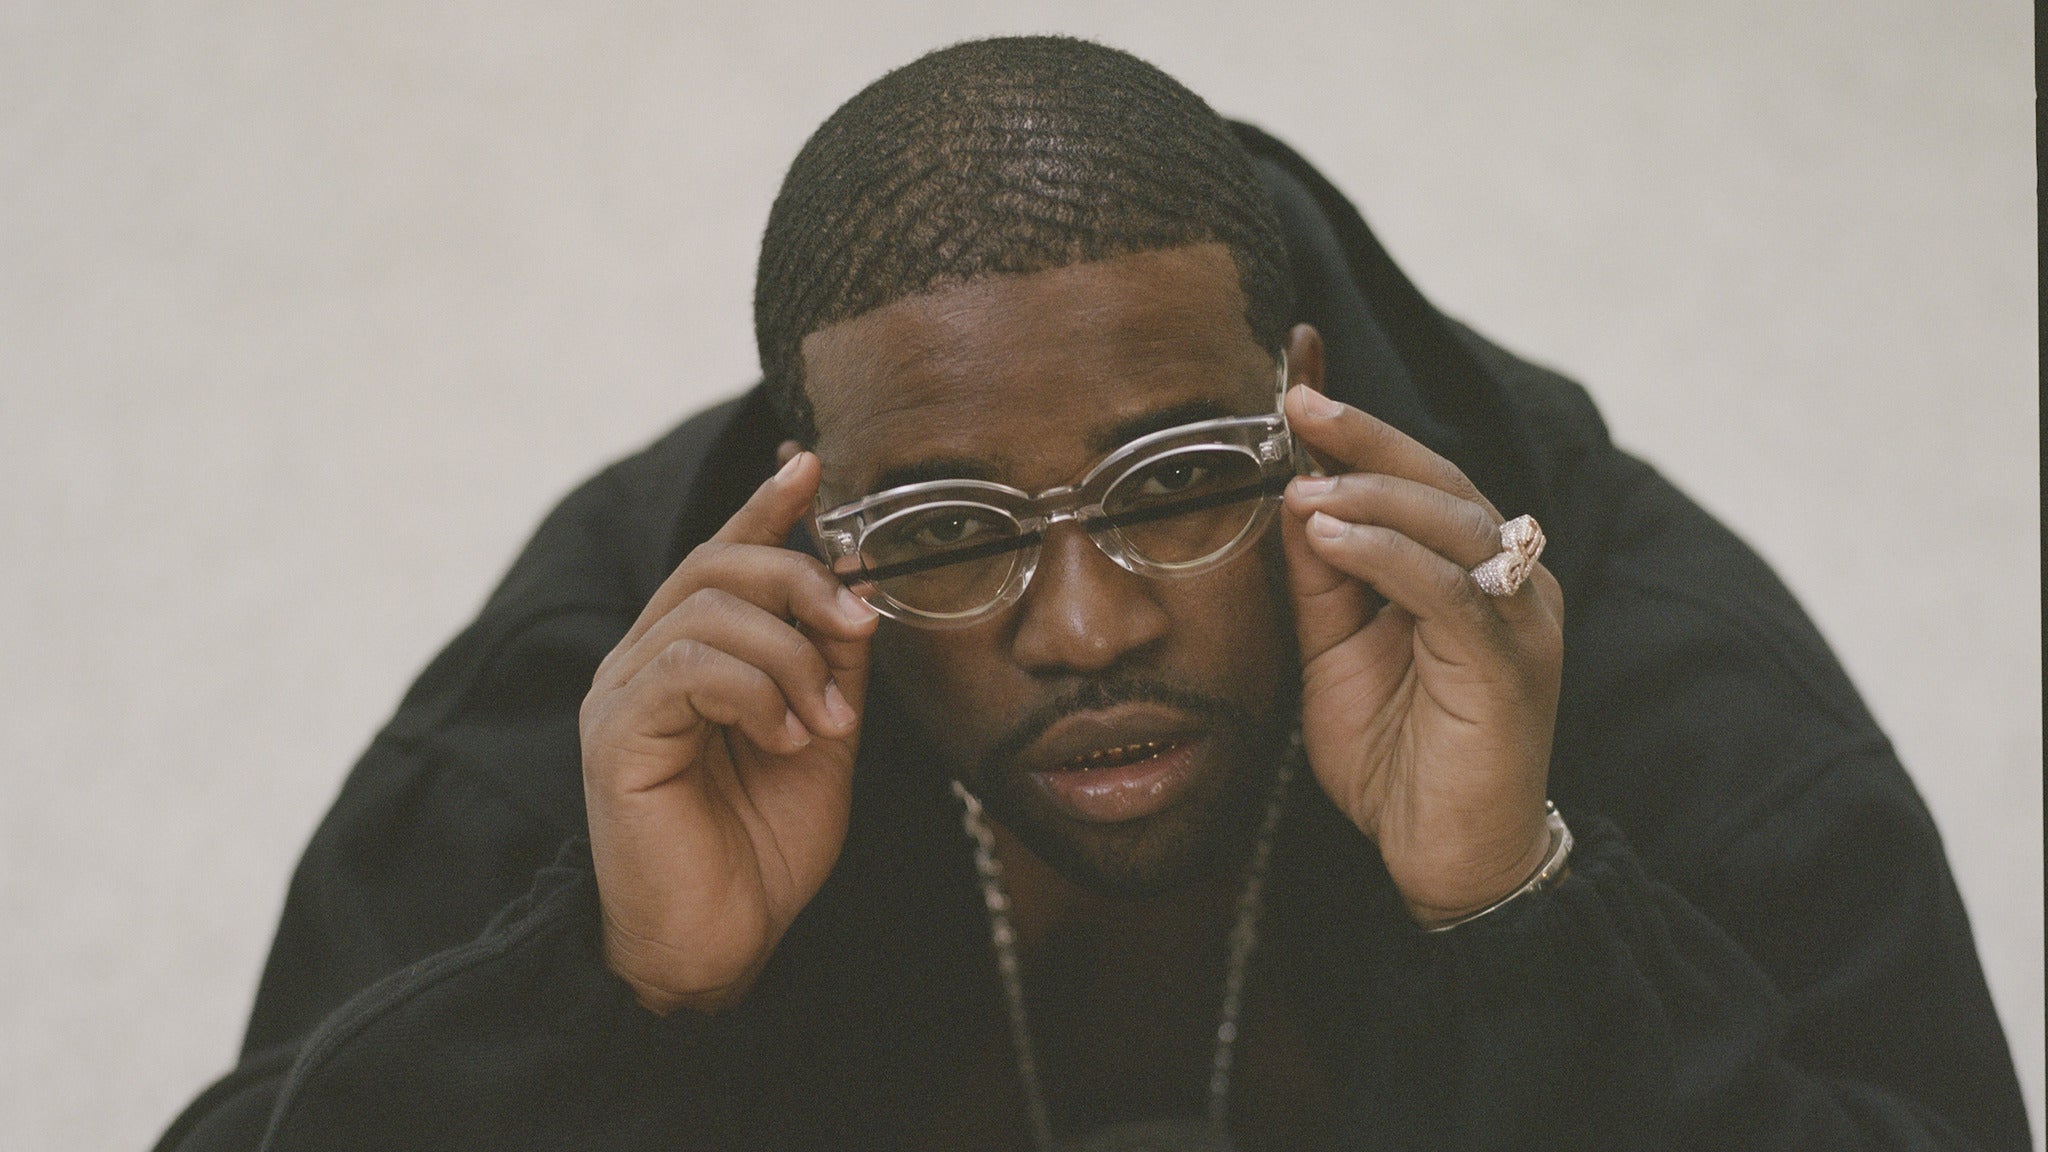 FERG presents Mad Man Tour in Anaheim promo photo for Live Nation Mobile App presale offer code